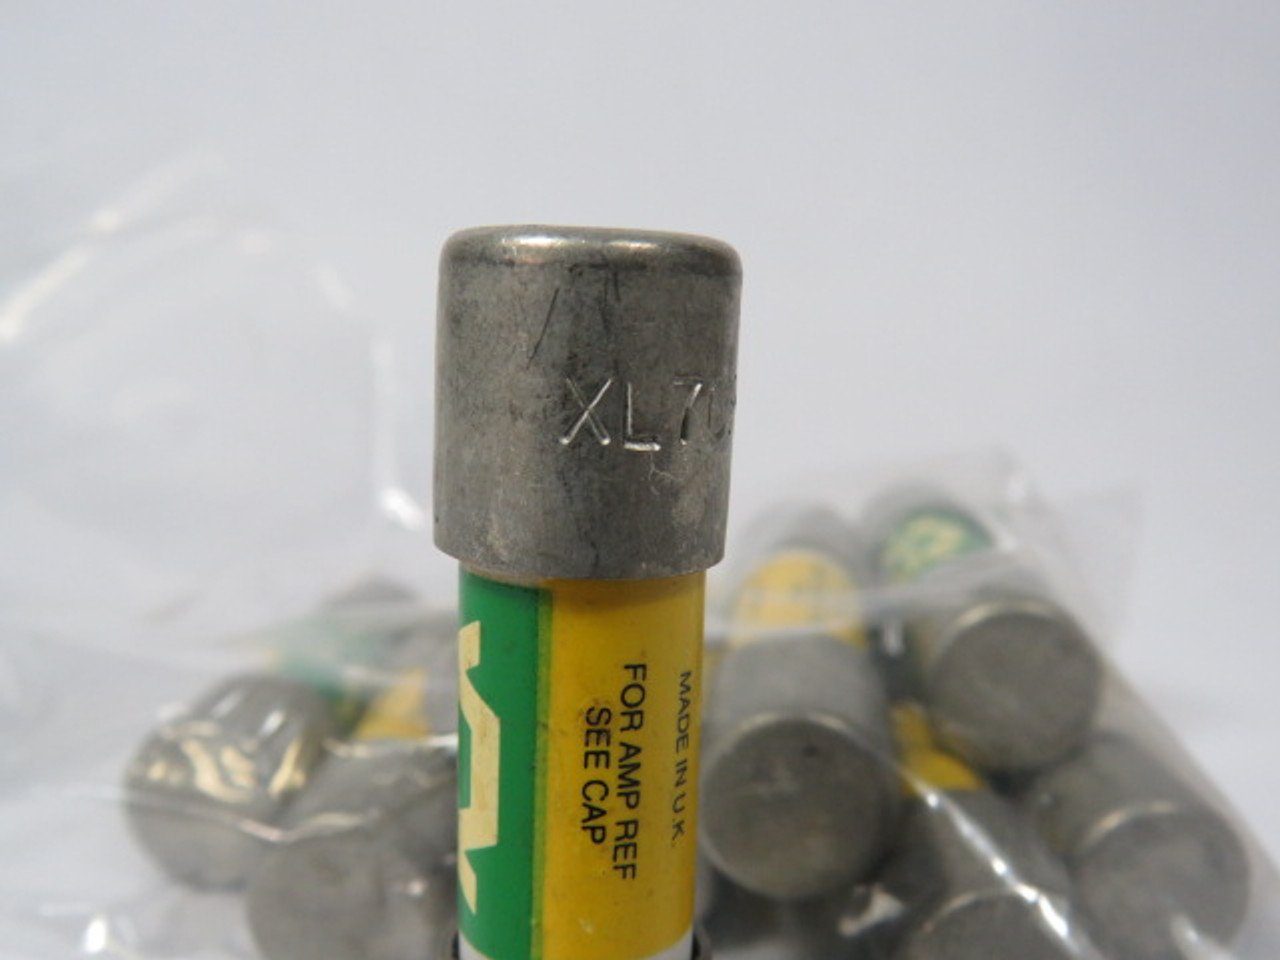 Brush XL-70P20 Semi-Conductor Fuse 20A Lot of 10 USED